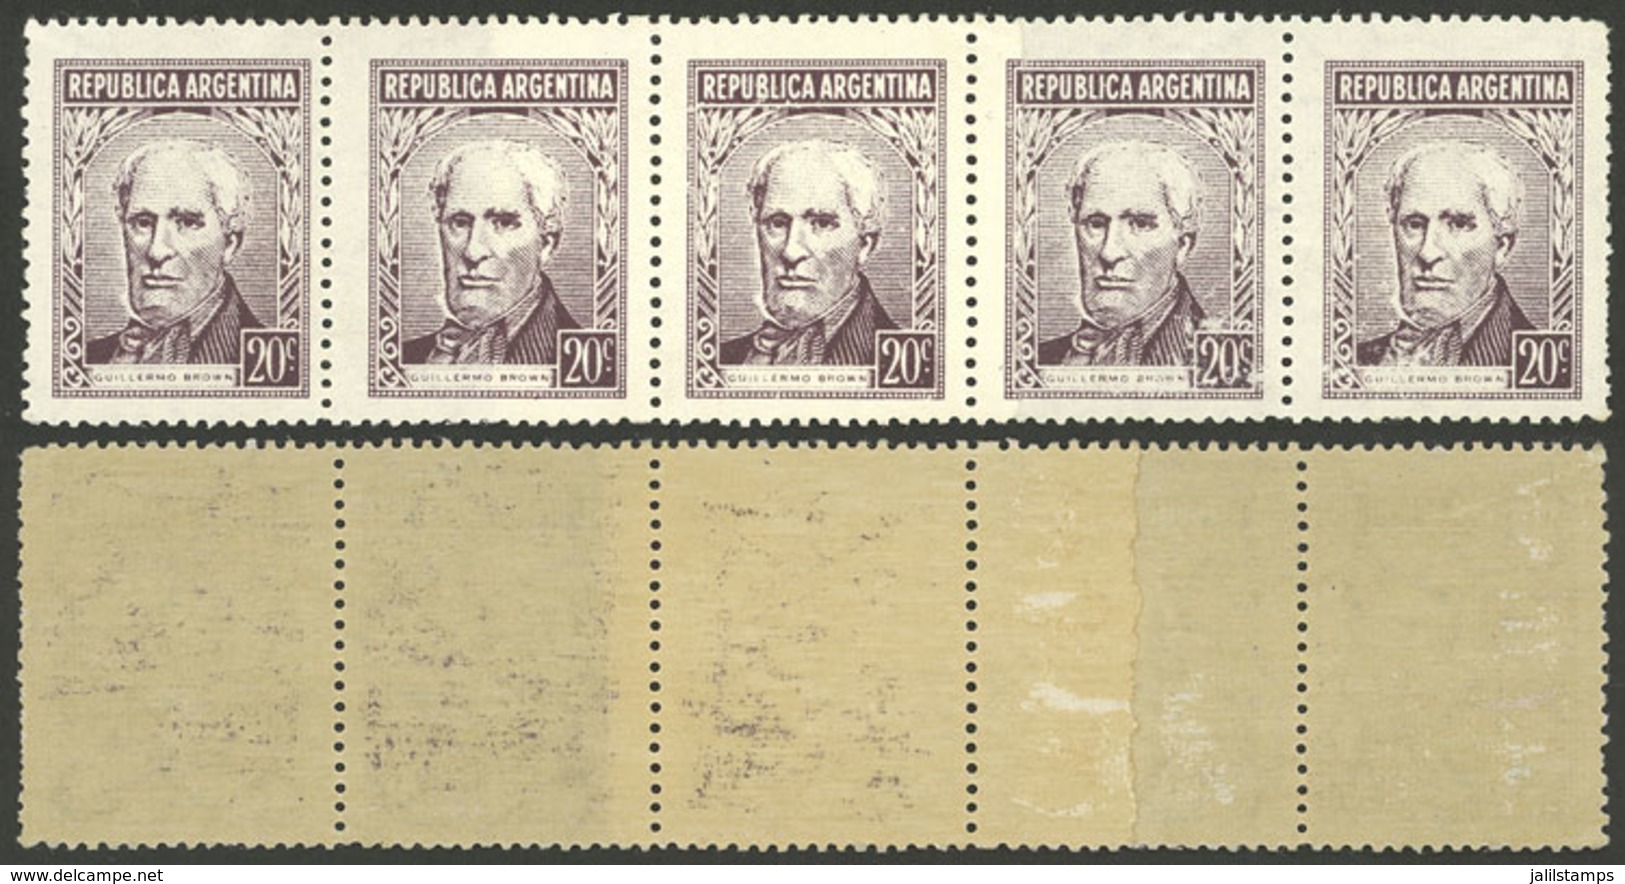 ARGENTINA: GJ.1038, Strip Of 5 With END-OF-ROLL DOUBLE PAPER Variety, VF Quality! - Ongebruikt